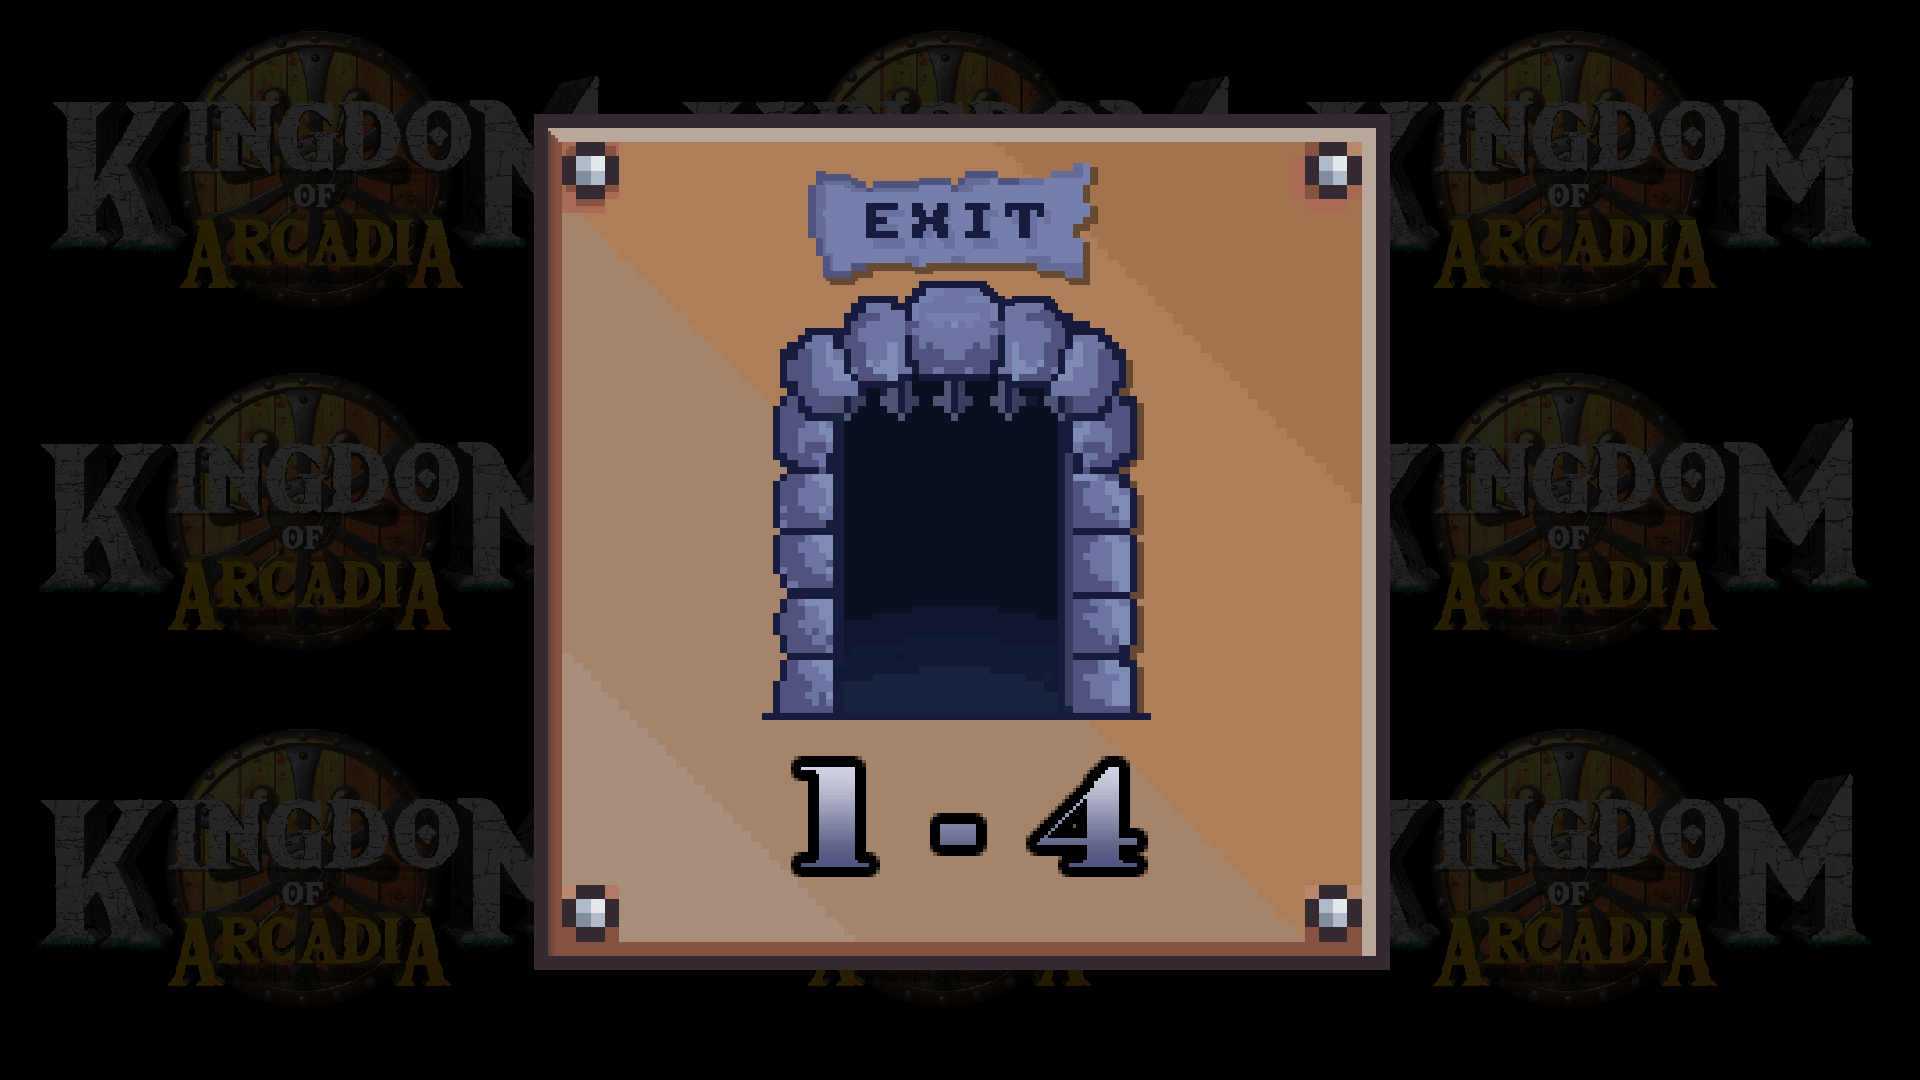 Icon for Level 1-4